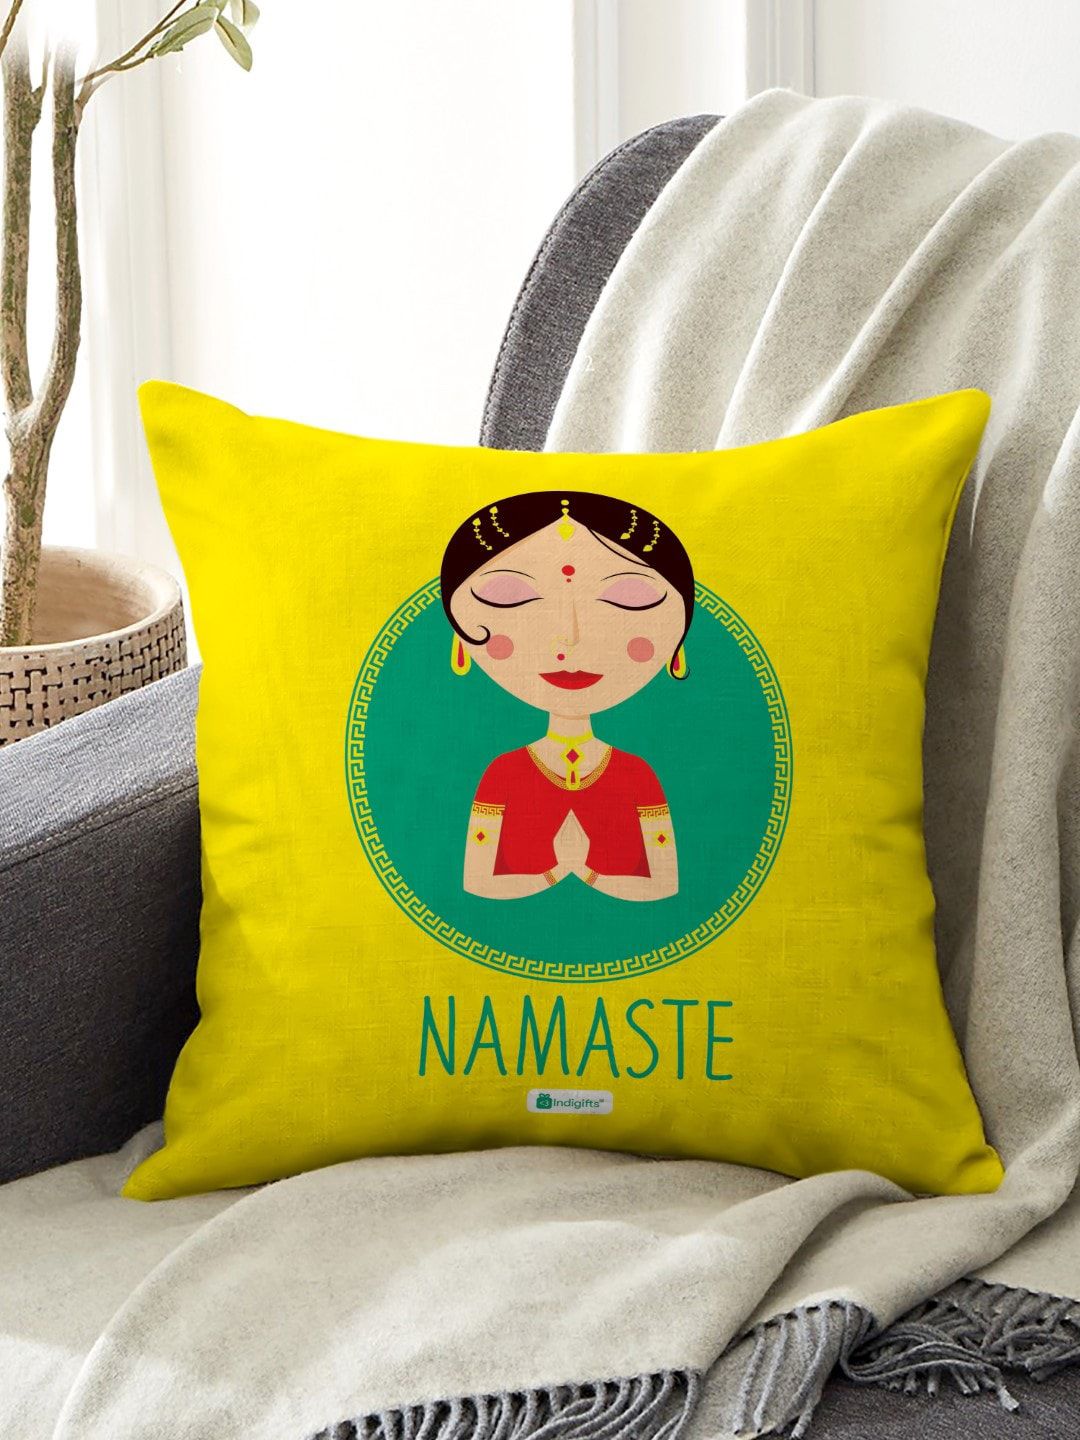 Indigifts Yellow Namaste Printed Cushion Cover With Filler Price in India